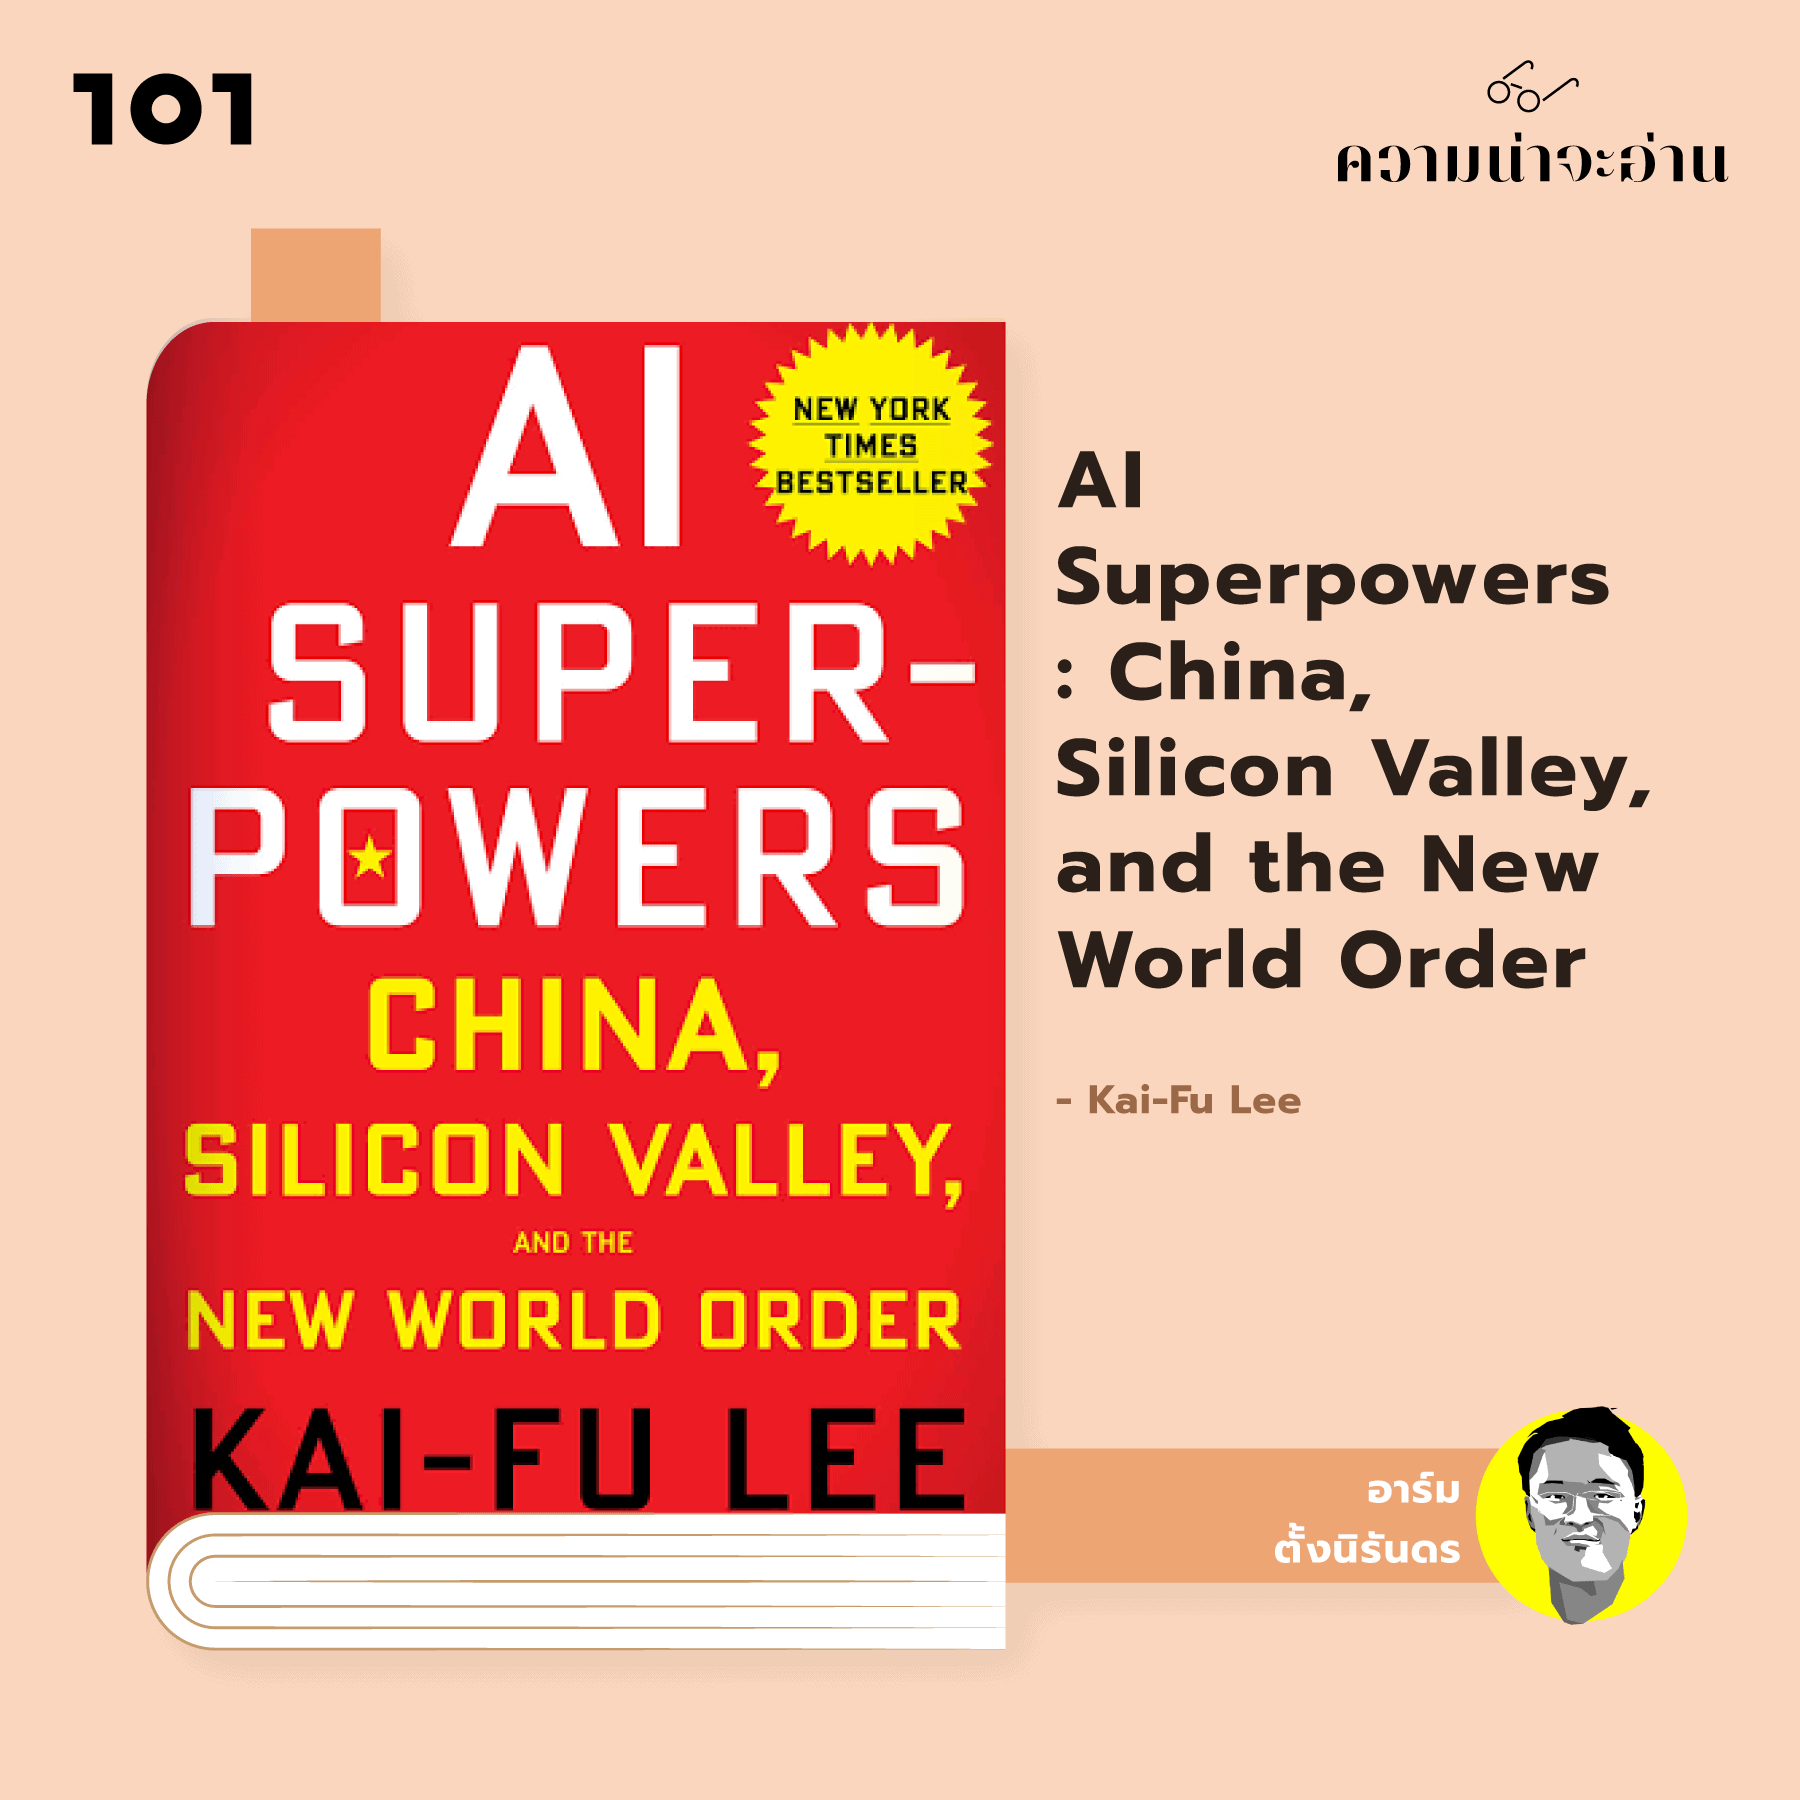 1. AI Superpowers : China, Silicon Valley, and the new world order